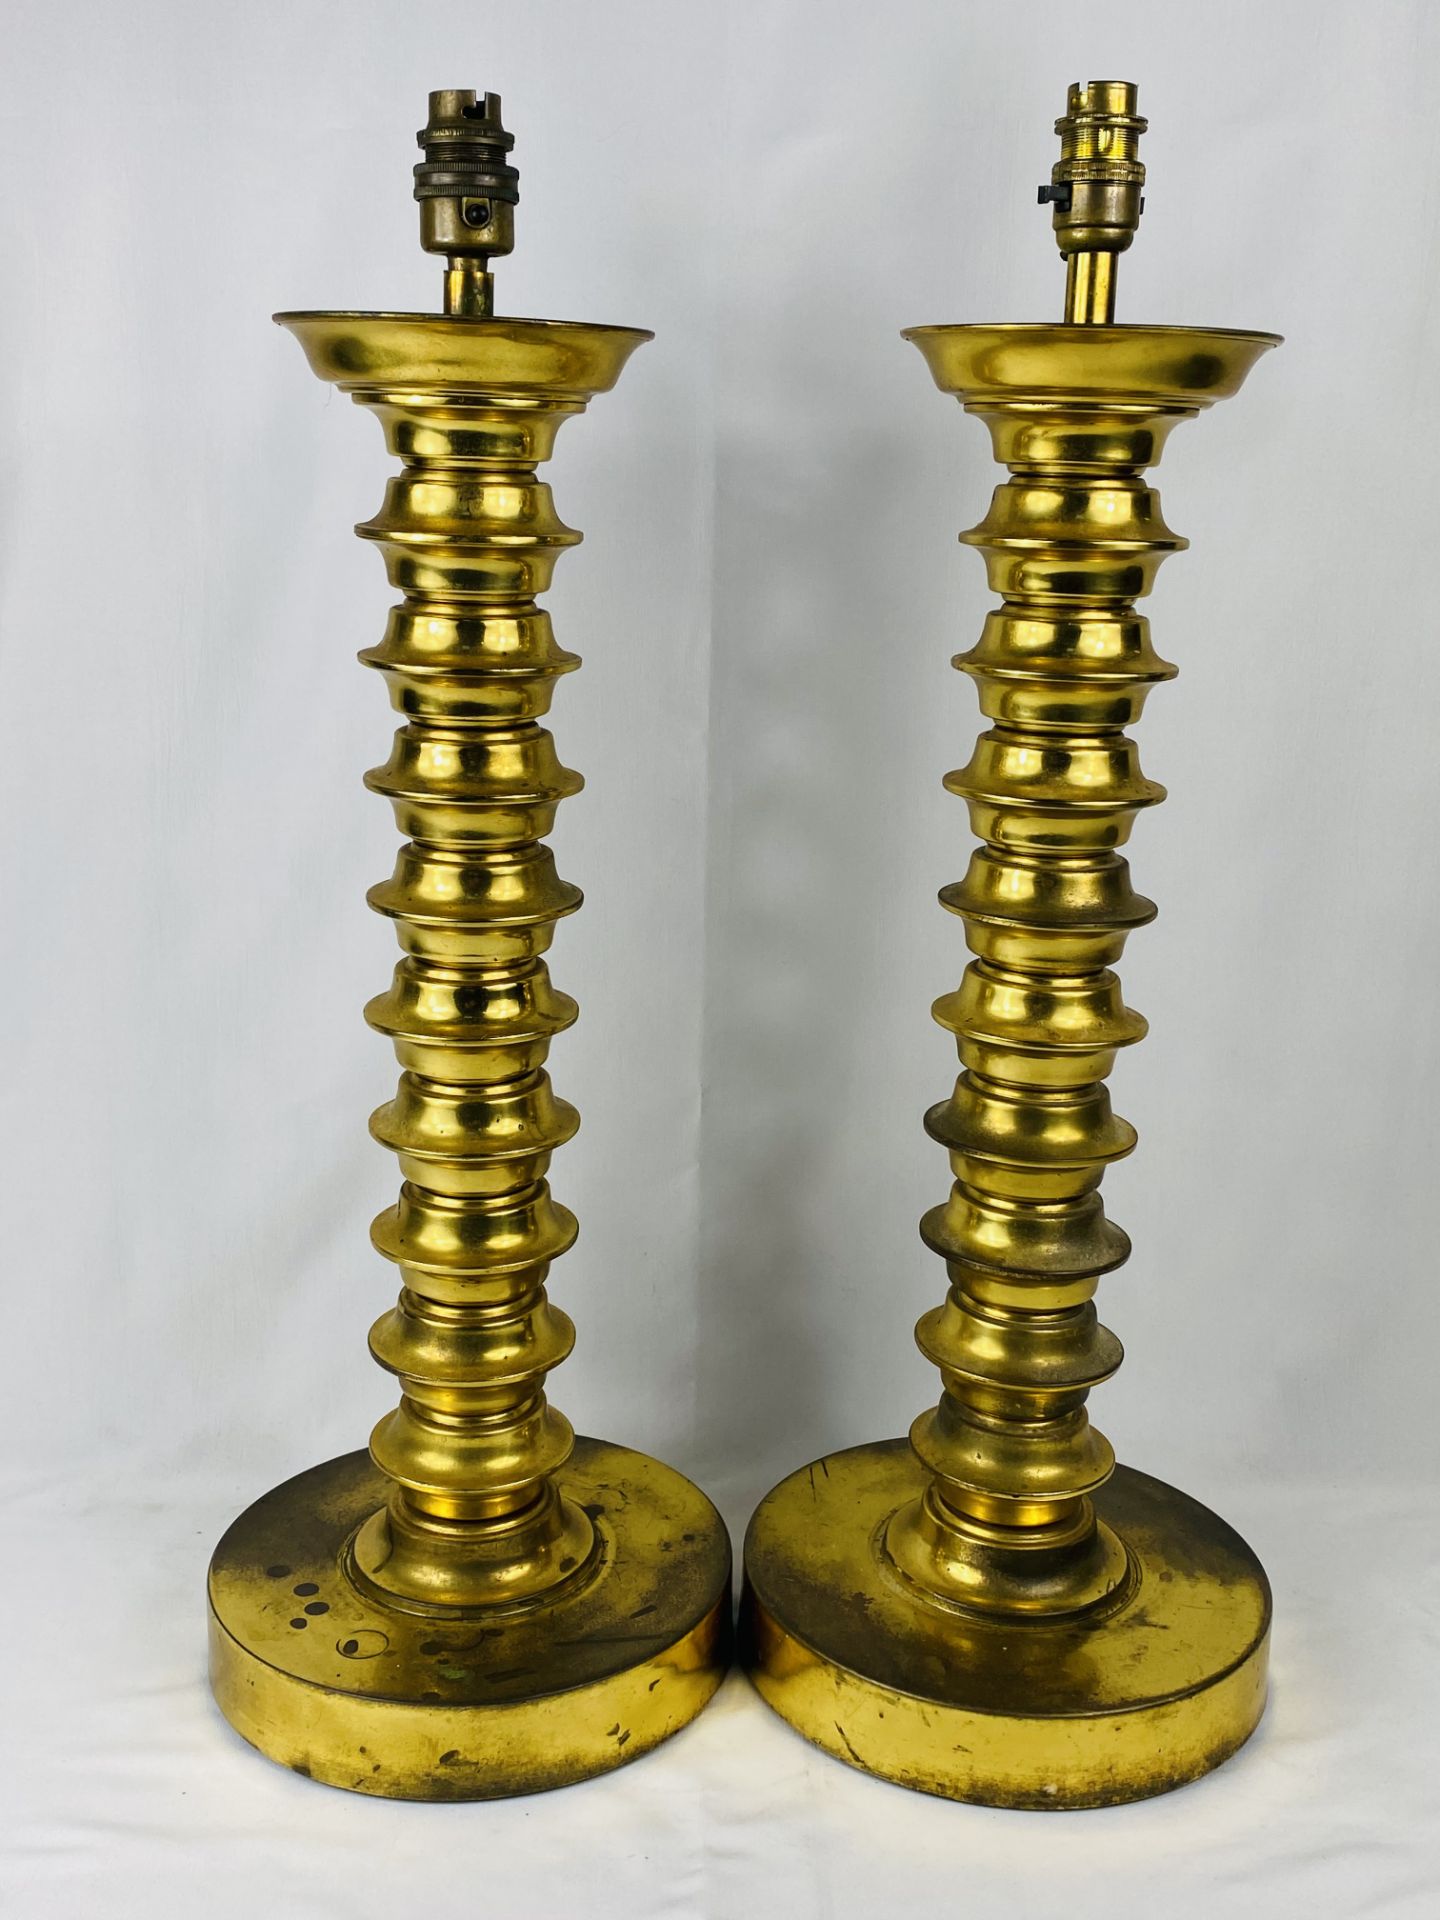 Pair of brass table lamps - Image 2 of 4